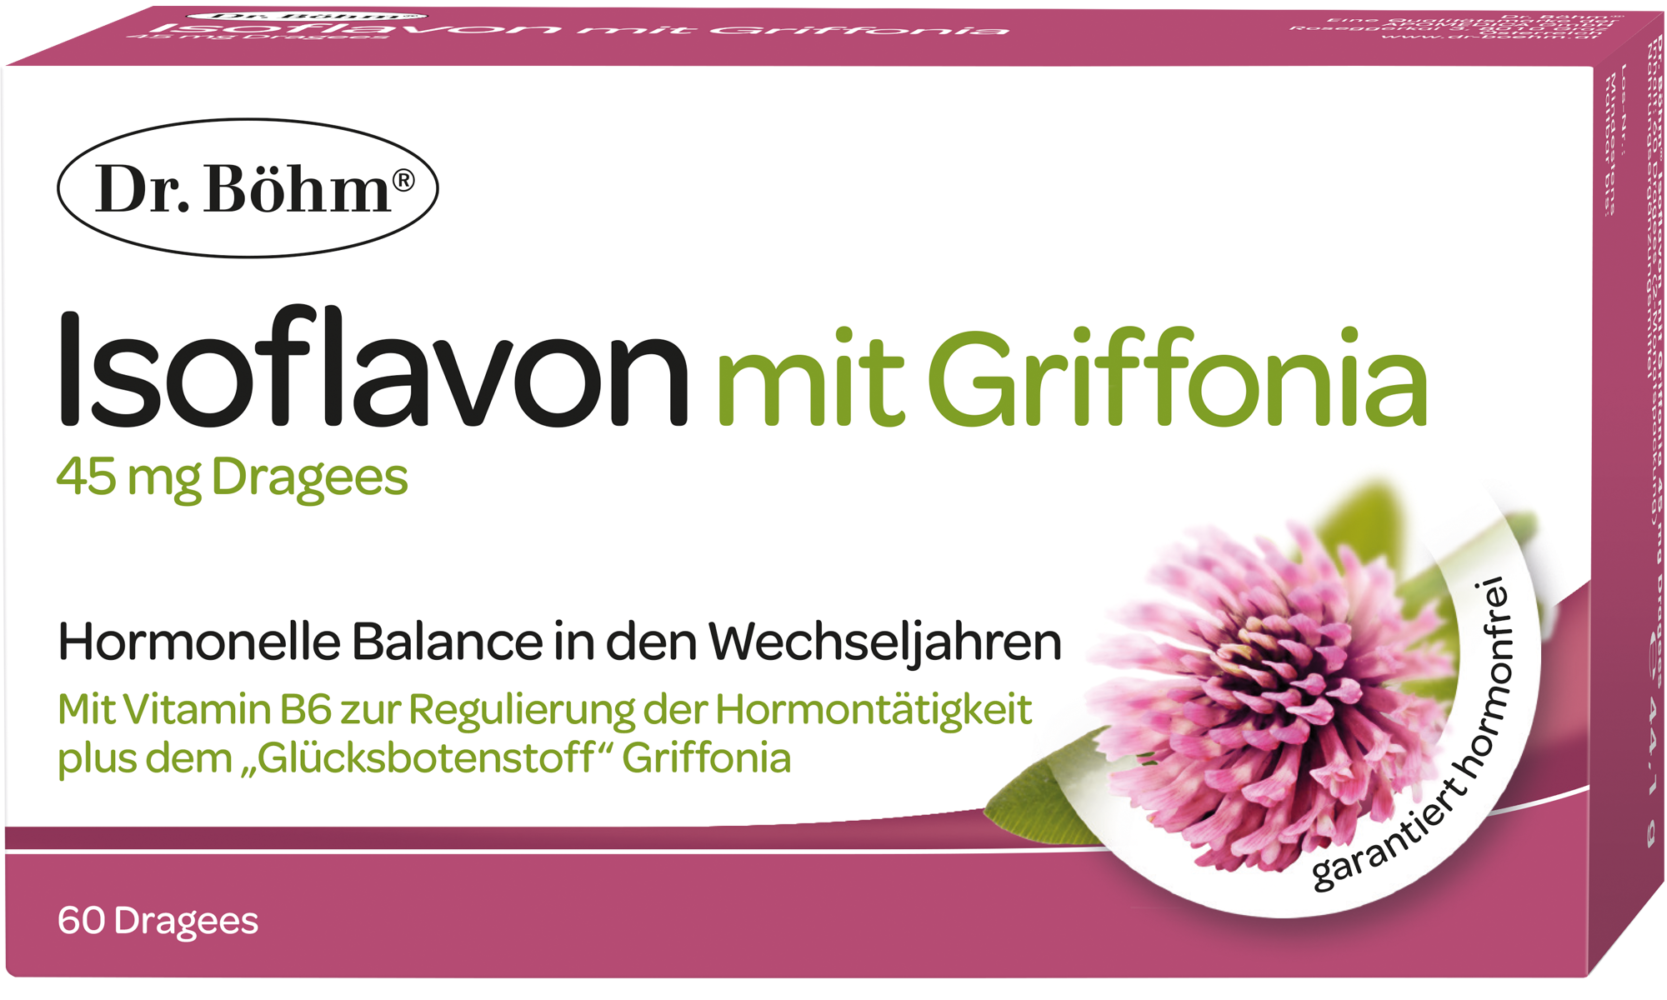 Dr. Böhm® Isoflavon mit Griffonia 45 mg Dragees